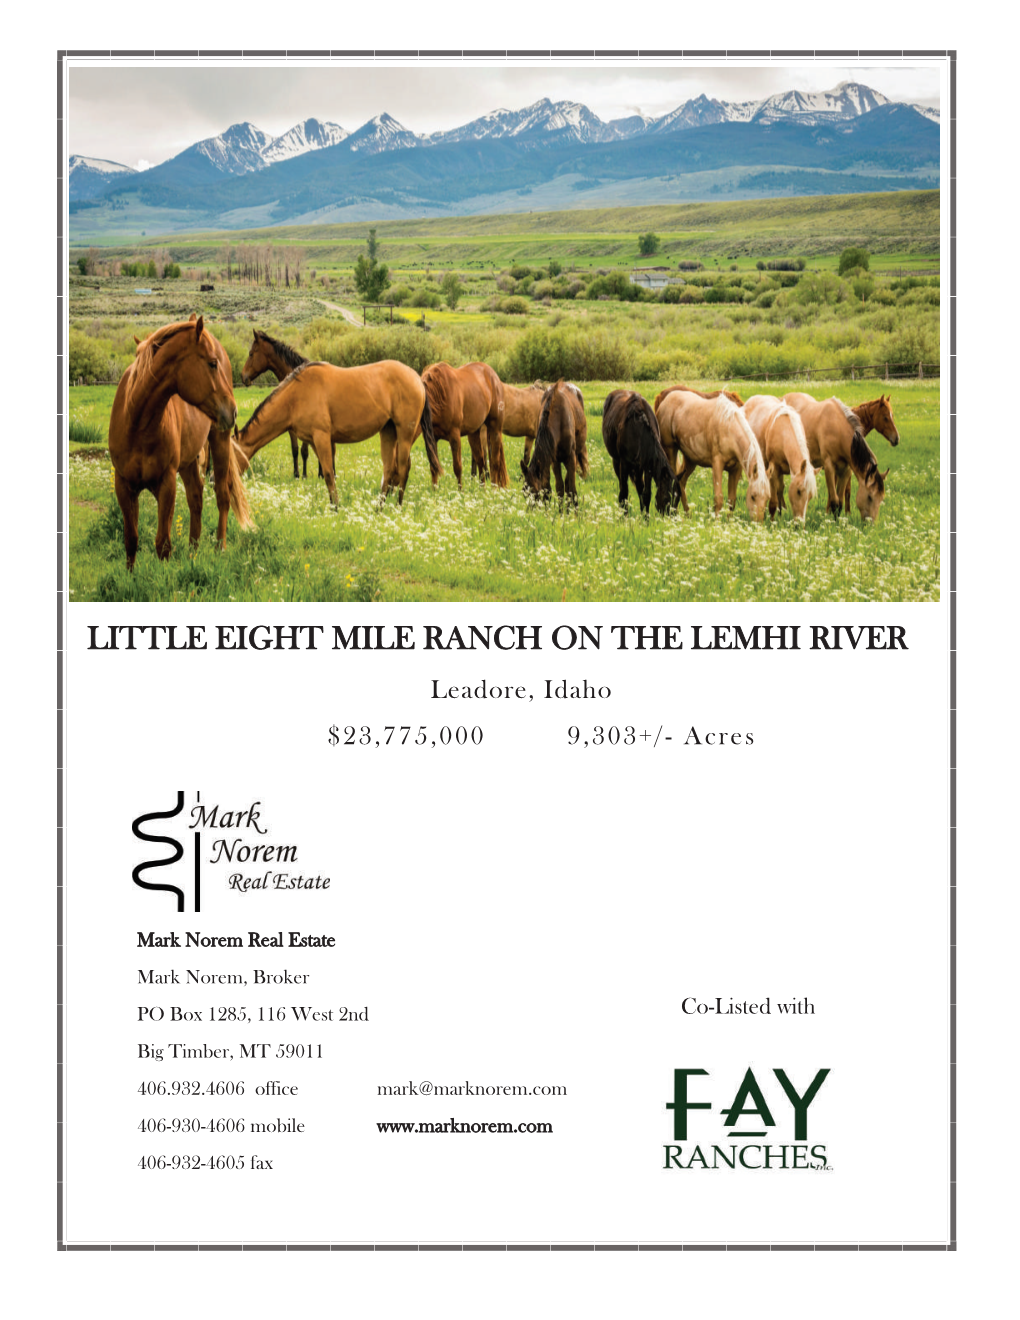 LITTLE EIGHT MILE RANCH on the LEMHI RIVER Leadore, Idaho $23,775,000 9,303+/- Acres